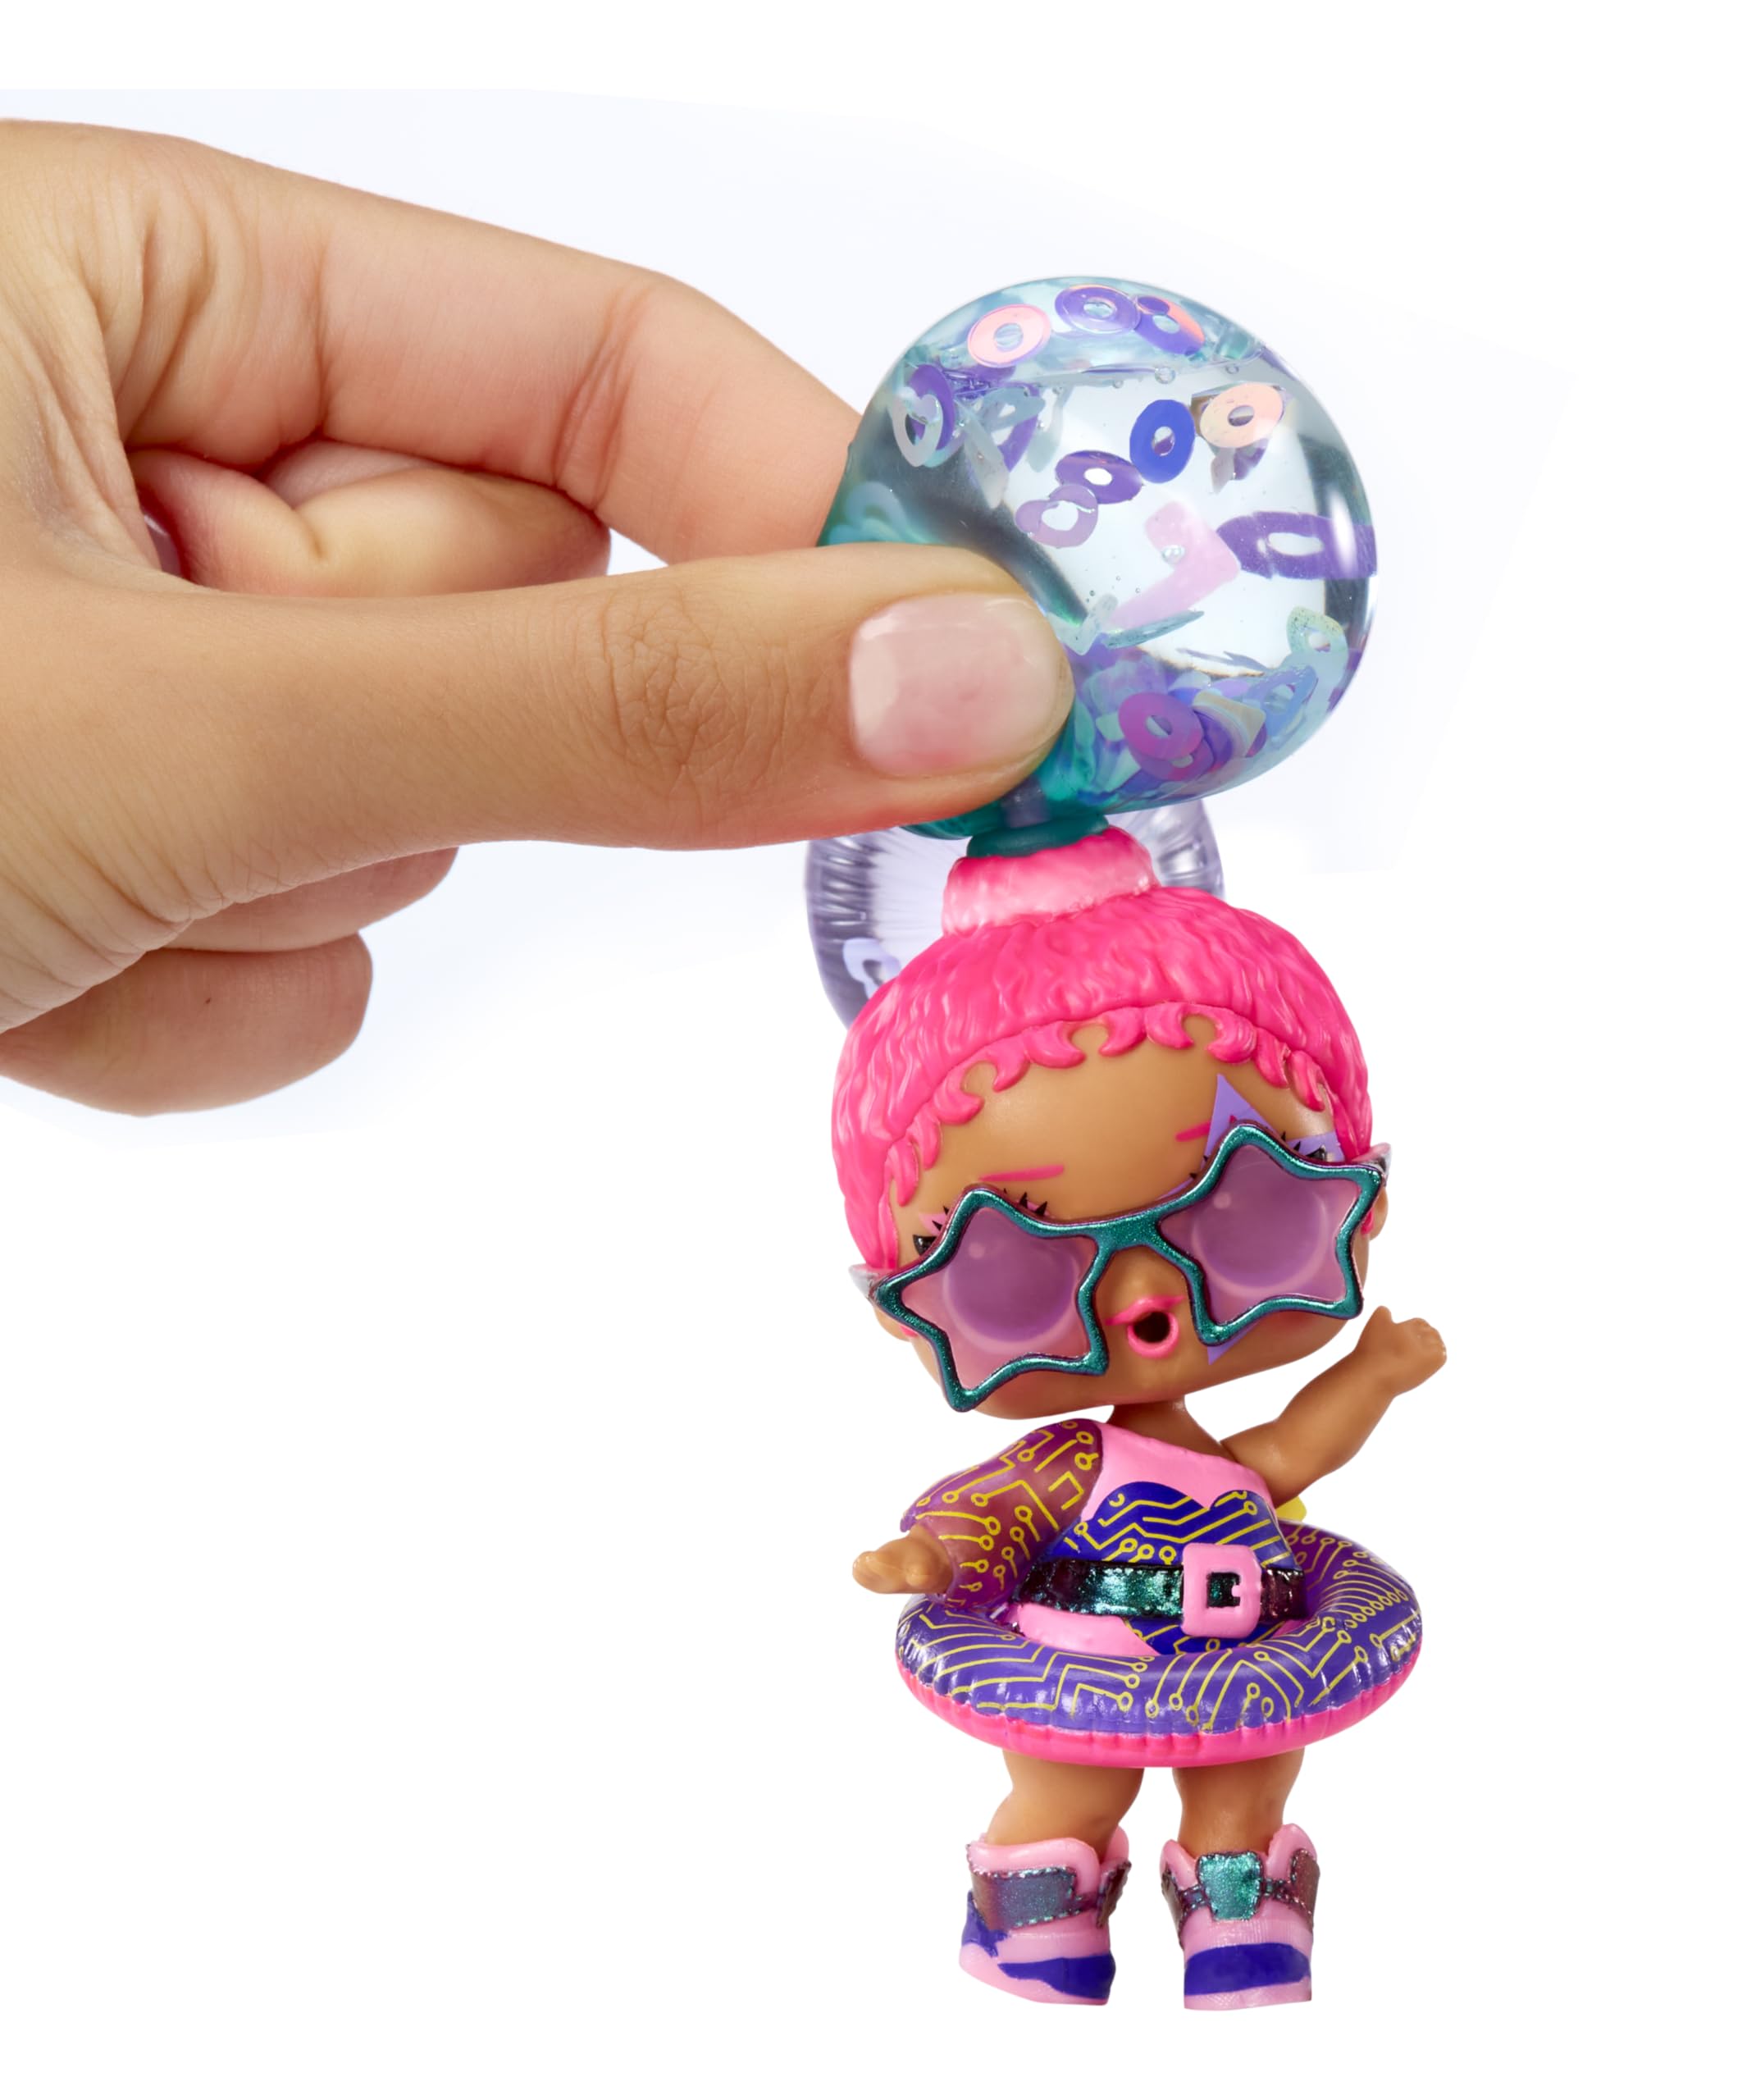 LOL Surprise Water Balloon Surprise Dolls with Collectible Doll, Water Balloon Hair, Glitter Balloons, 4 Ways to Play, Water Play, Reusable Water Balloons, Surprise Doll, Limited Edition Doll 4+